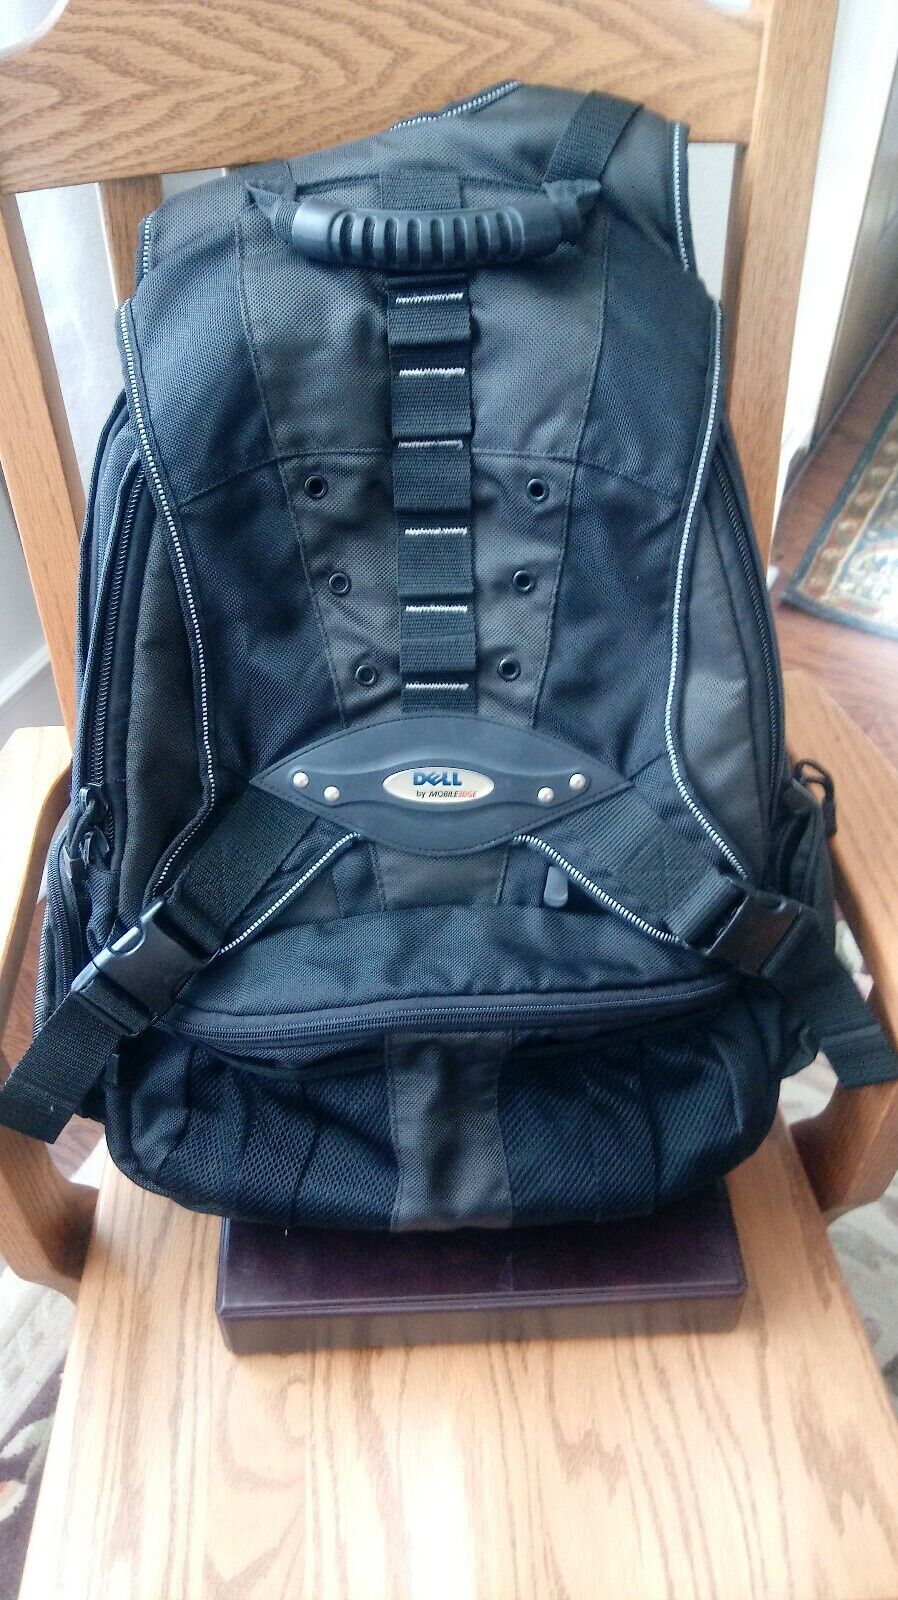 Dell By Mobile Edge Backpack For Carrying up to 17.3" Laptop Black Color